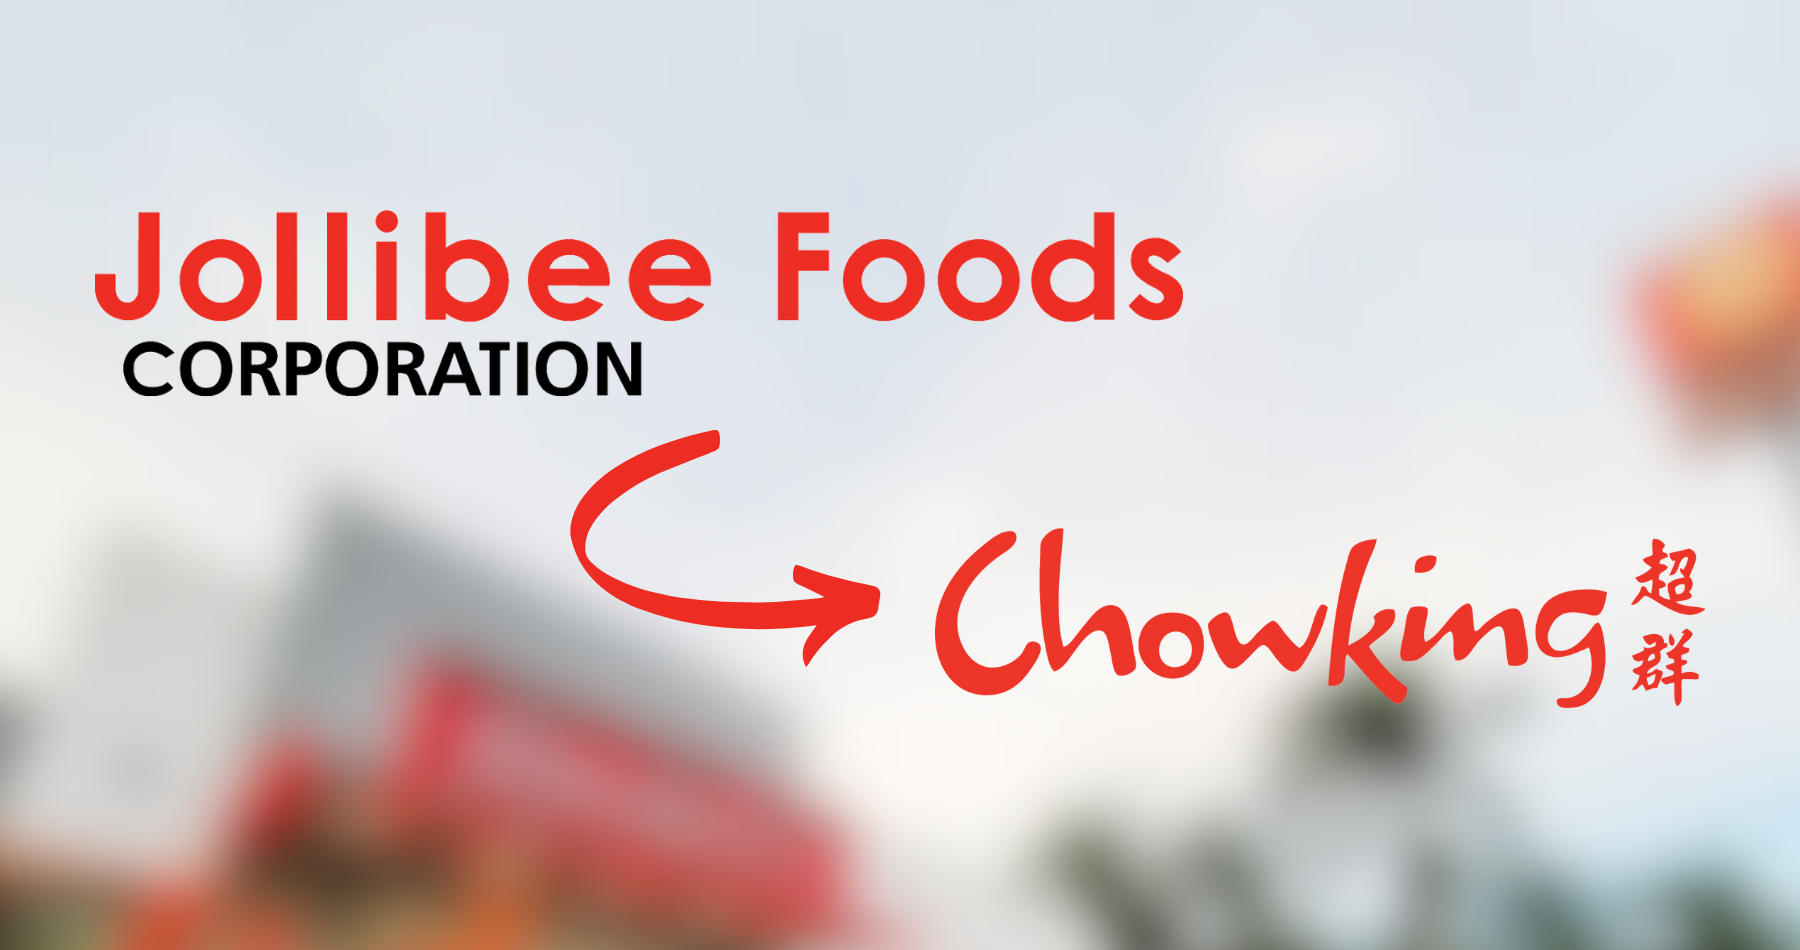 Industry-changing move: Chowking is fully acquired by JFC